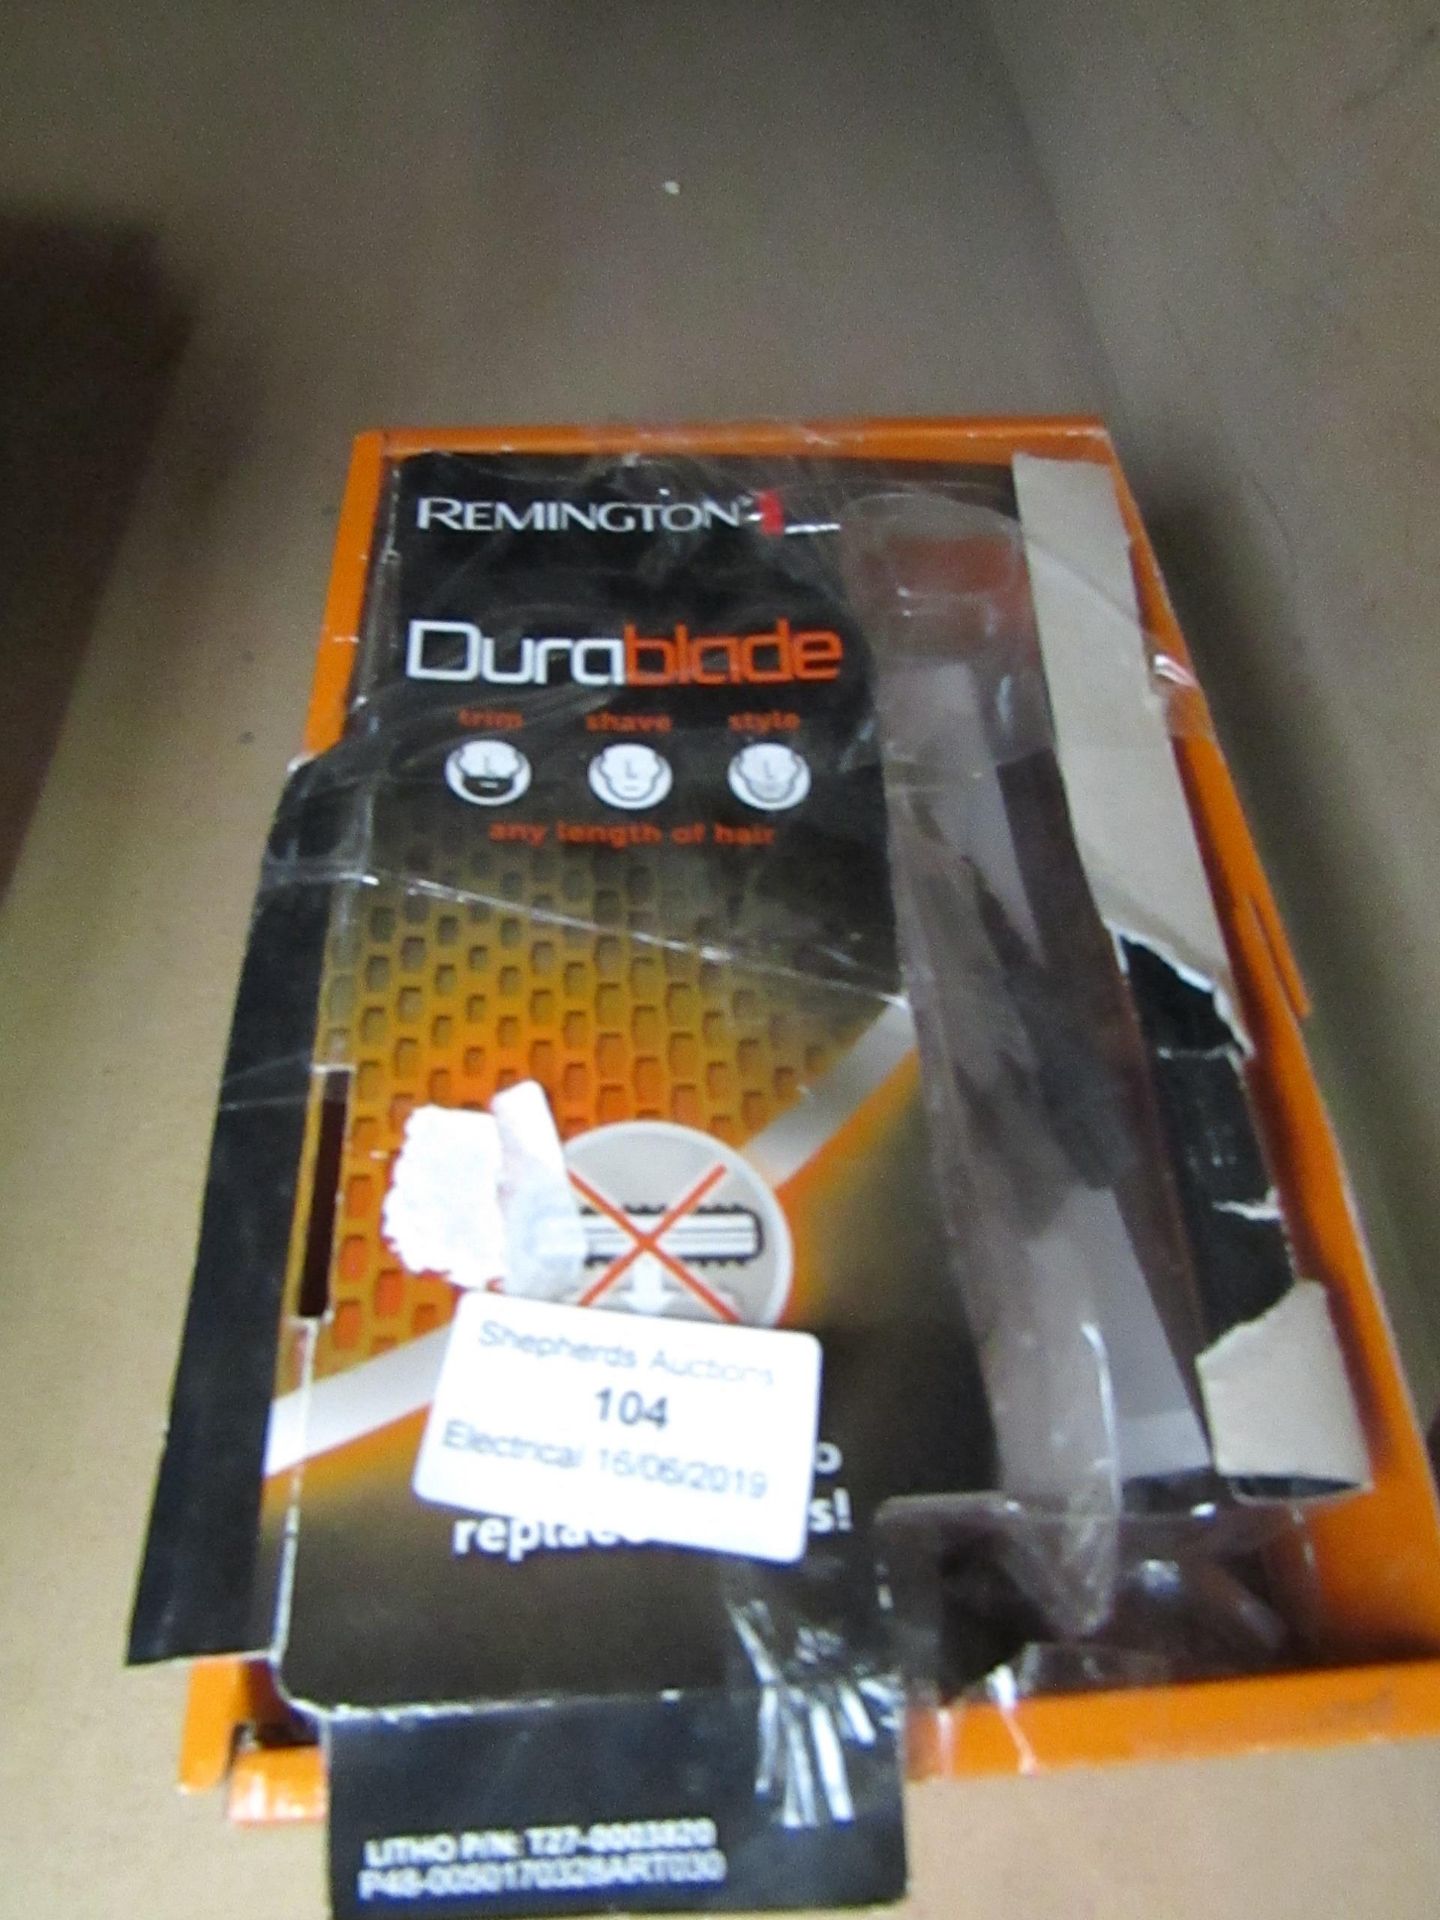 Remington DuraBlade beard trimmer, untested and boxed.